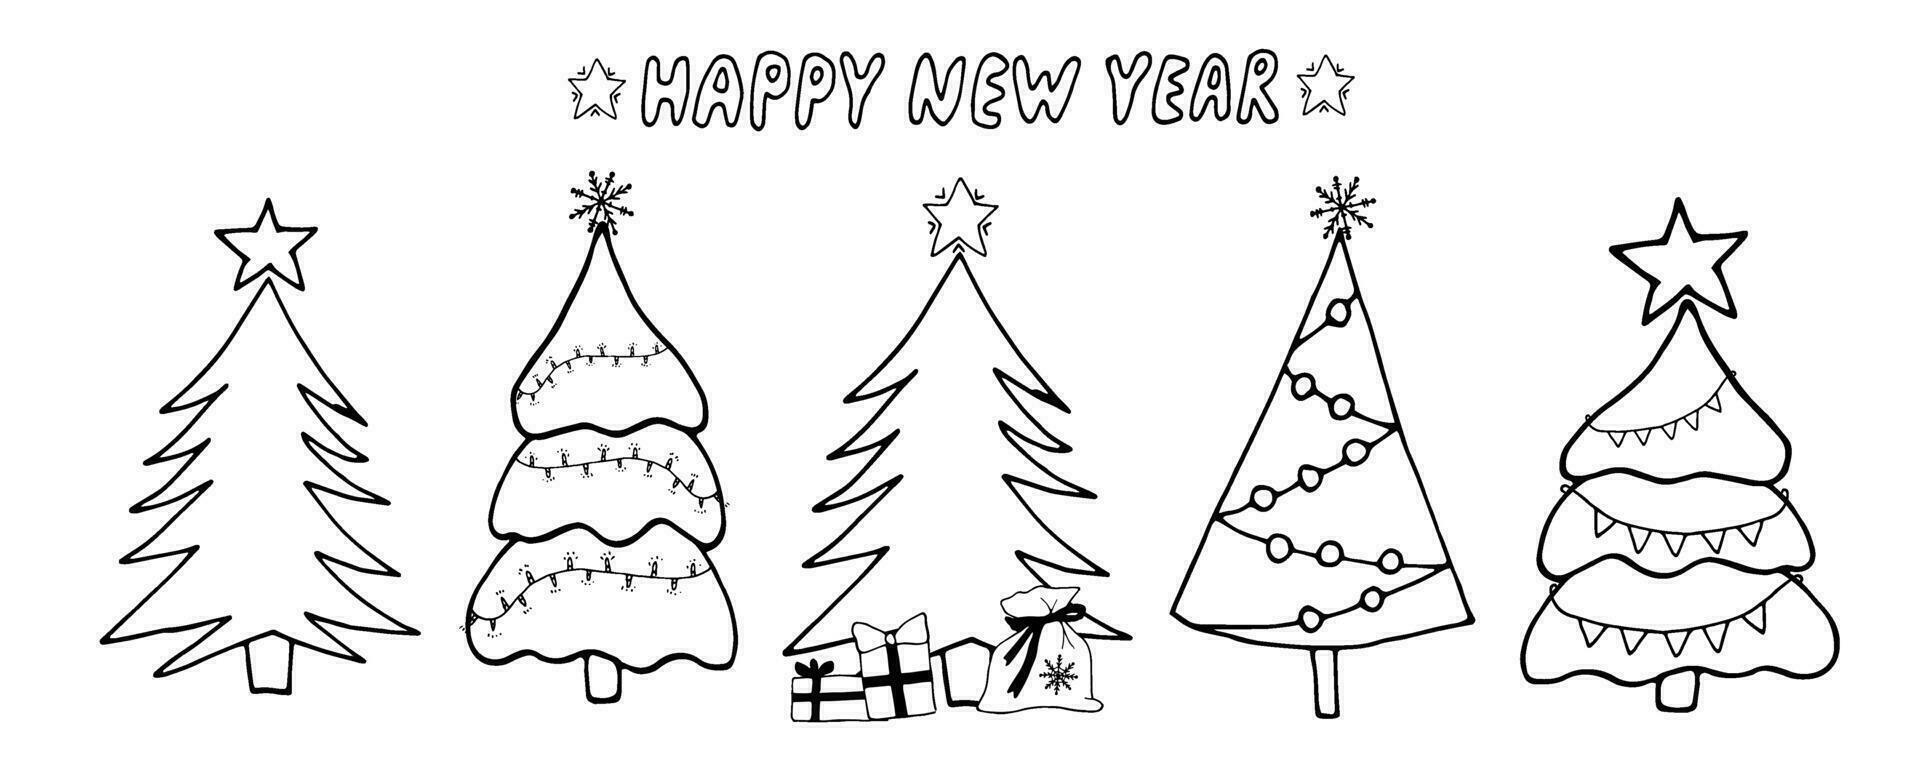 Collection of Christmas trees. Symbol of winter holidays. Happy New Year and Merry Christmas. Simple hand drawn doodle shape concept.For winter season cards, New Year posters and banners. vector